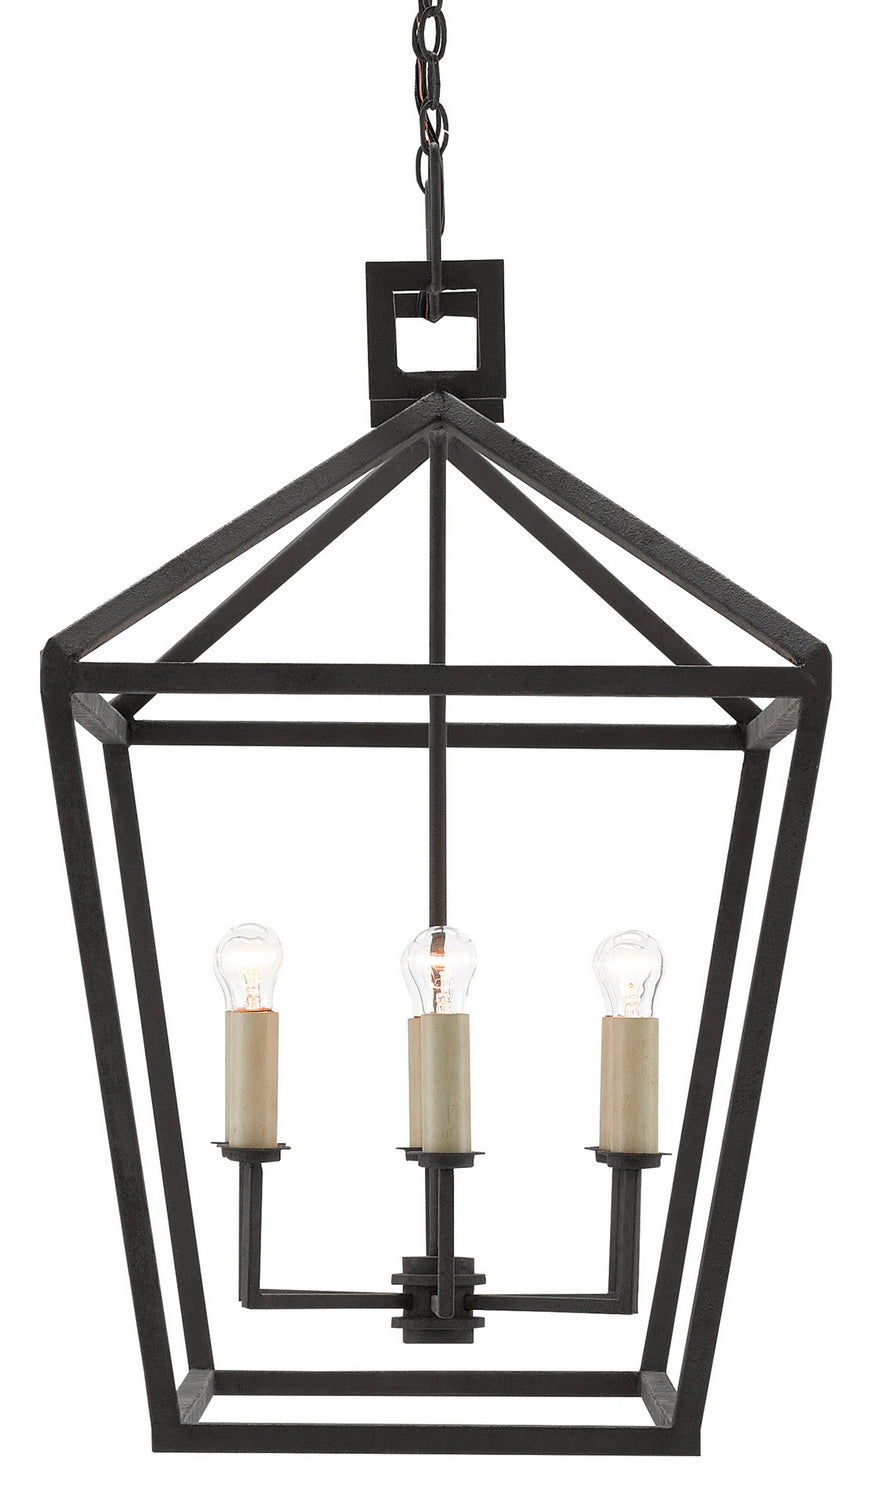 Six Light Lantern from the Denison collection in Molé Black finish